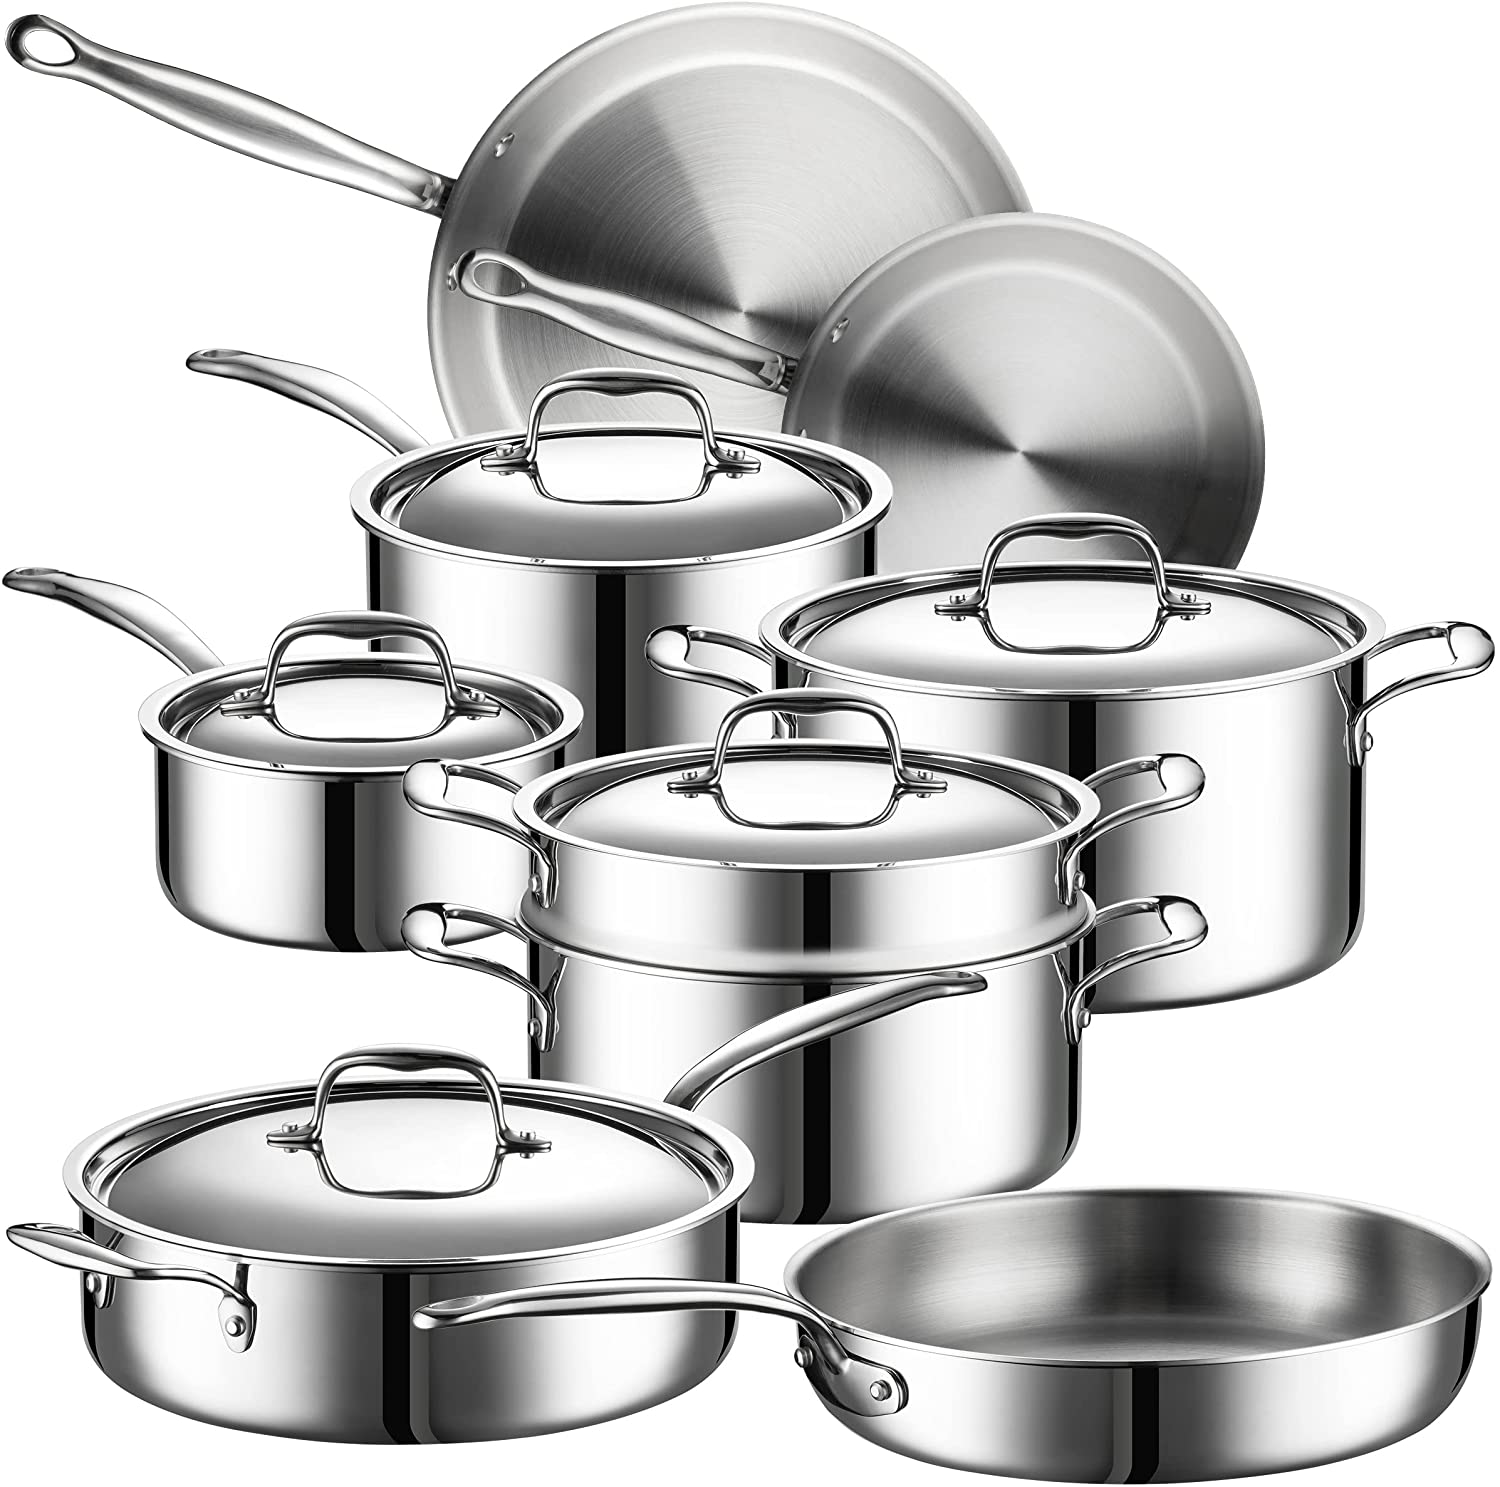 Best Stainless Steel Cookware Made in USA - Top Brands